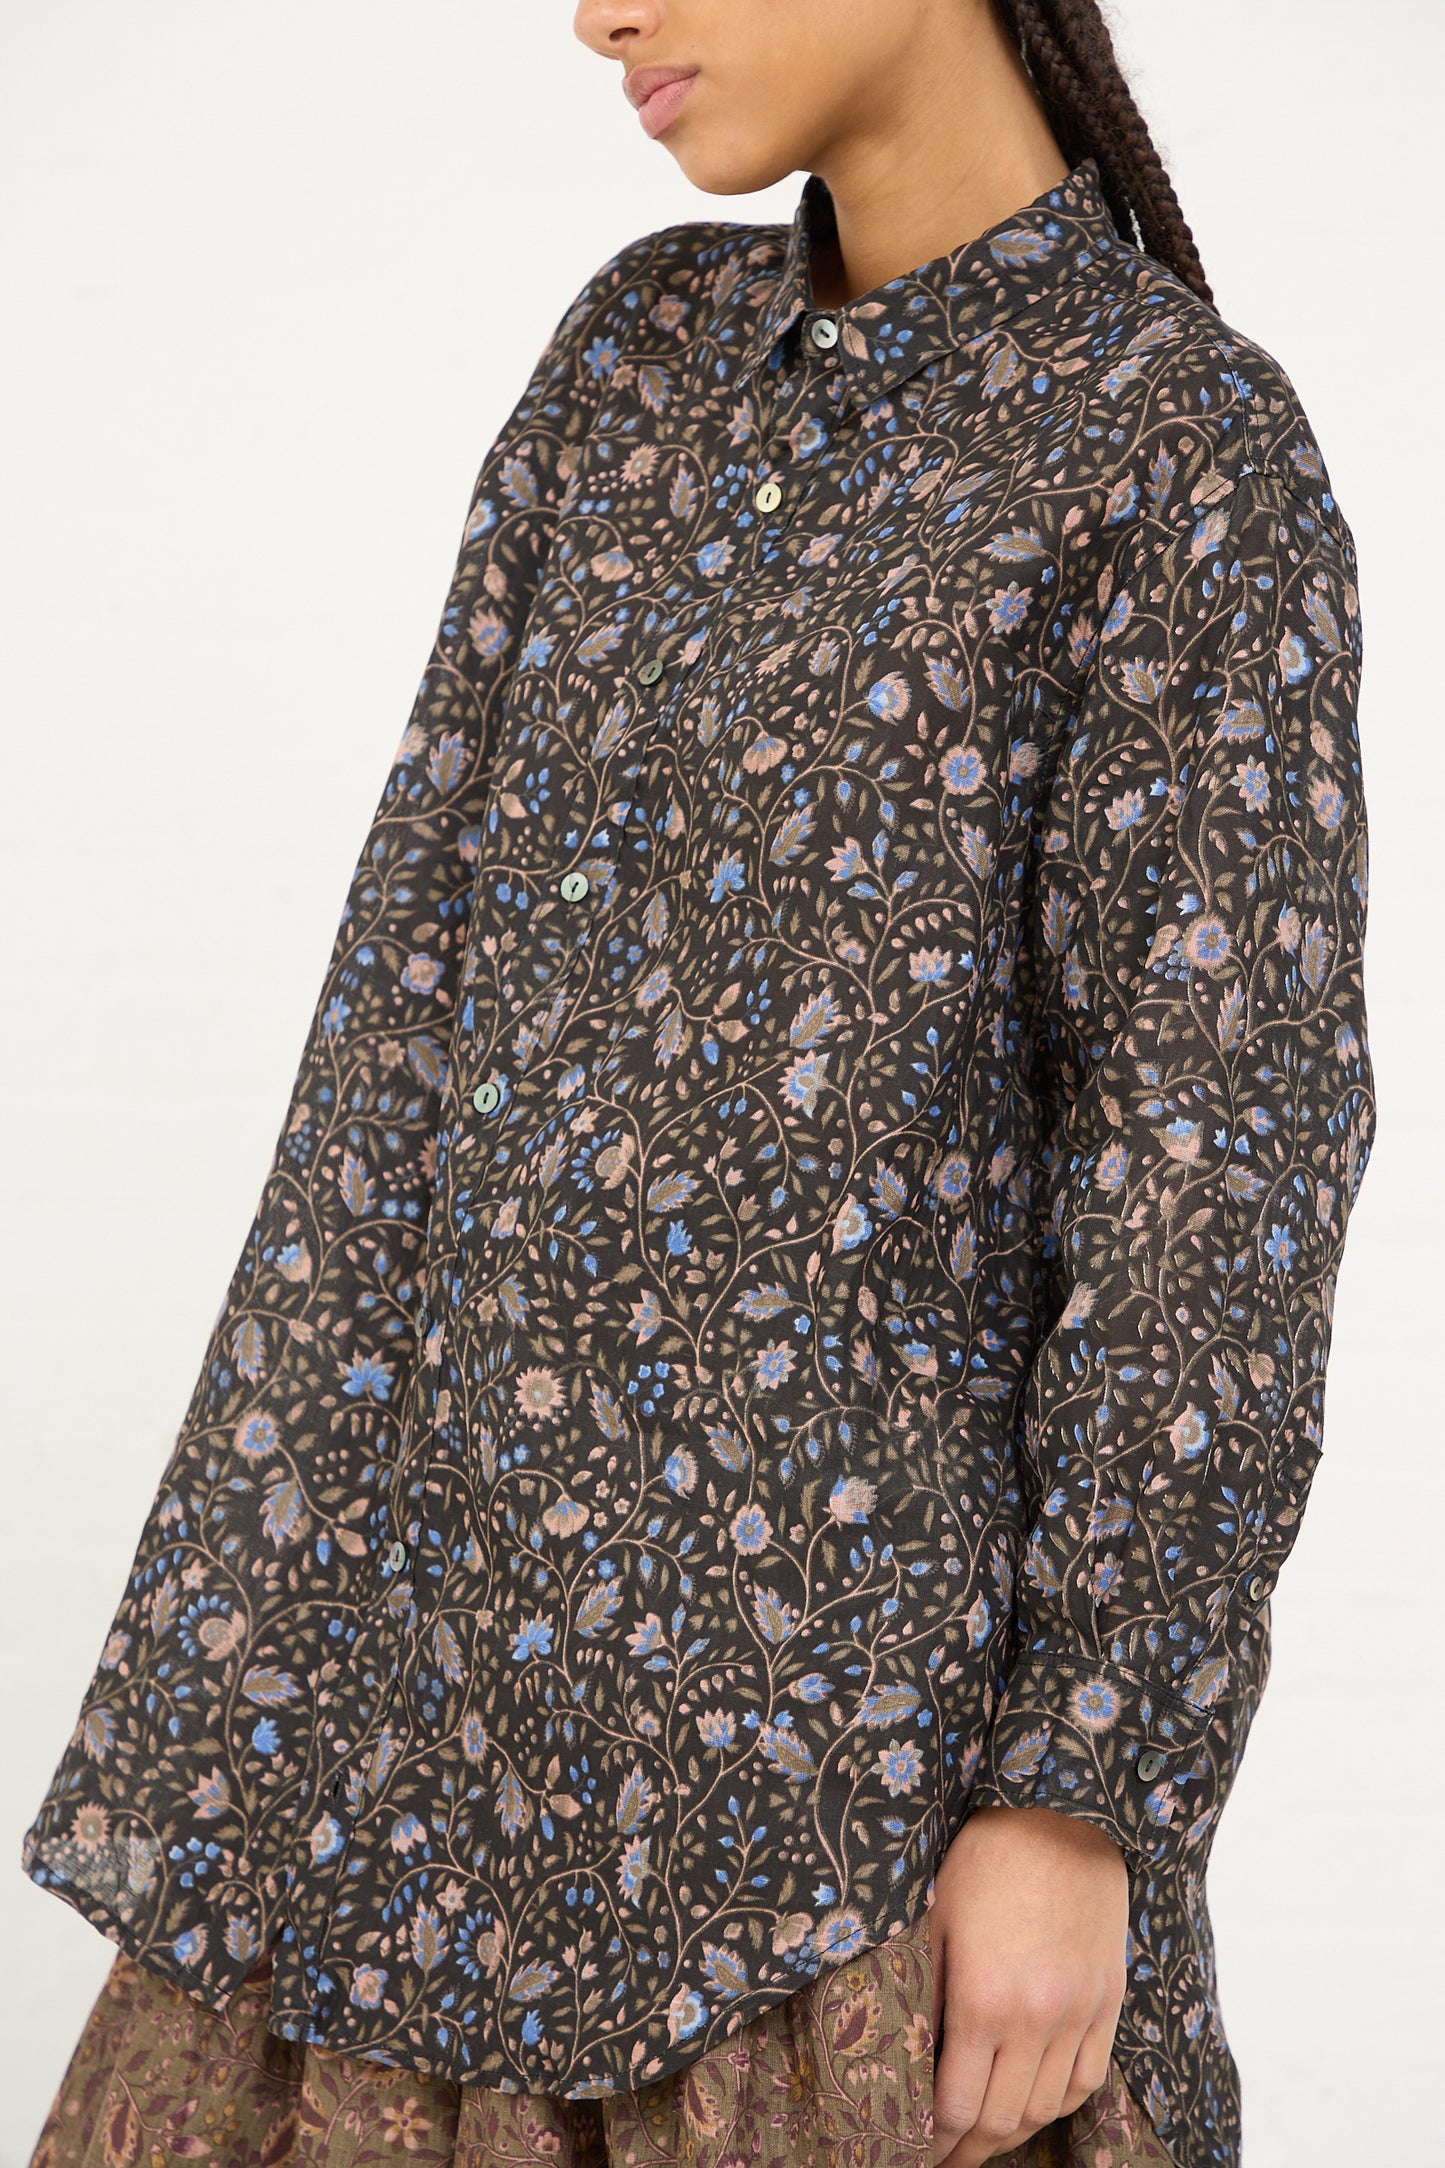 A person wearing a Black Linen Floral Shirt by Ichi Antiquités with a high neckline and long sleeves.